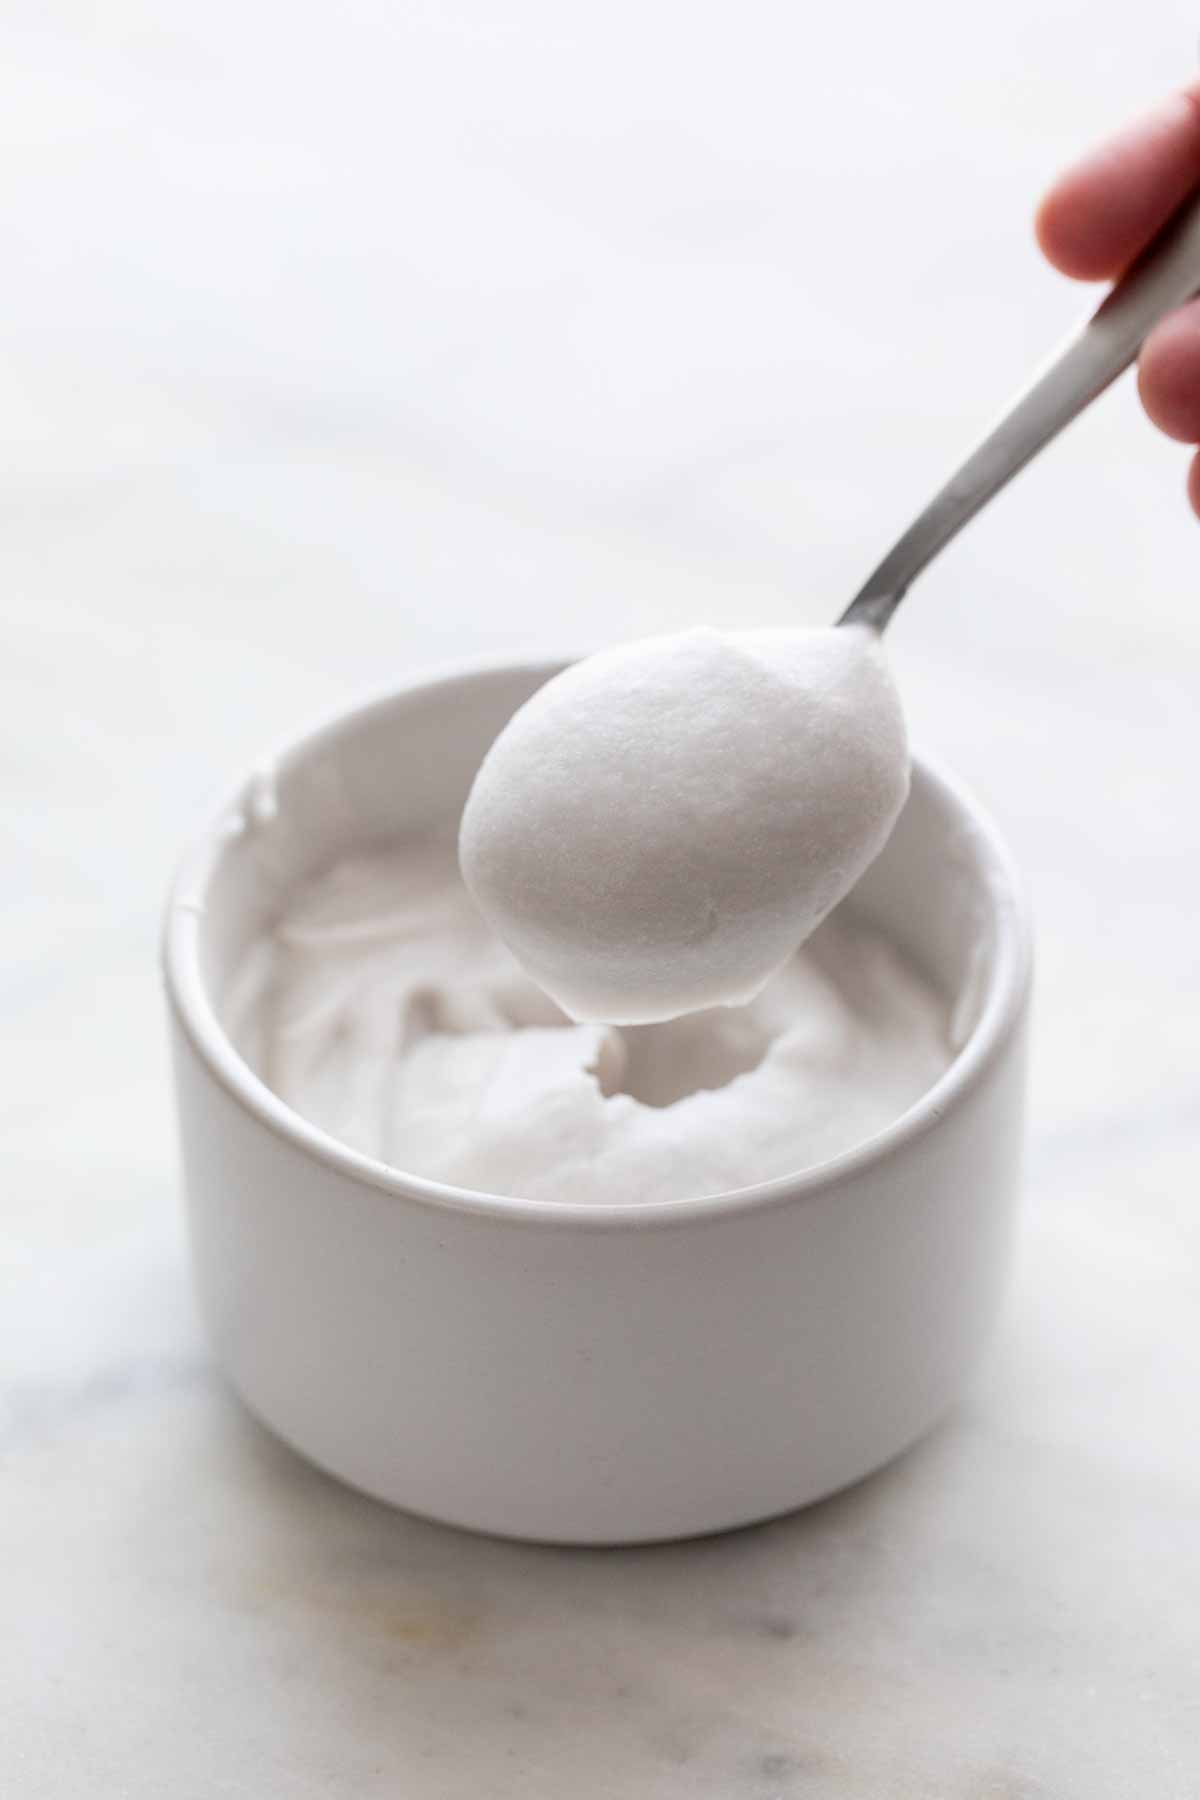 Spoon scooping vegan whipped cream from a bowl.